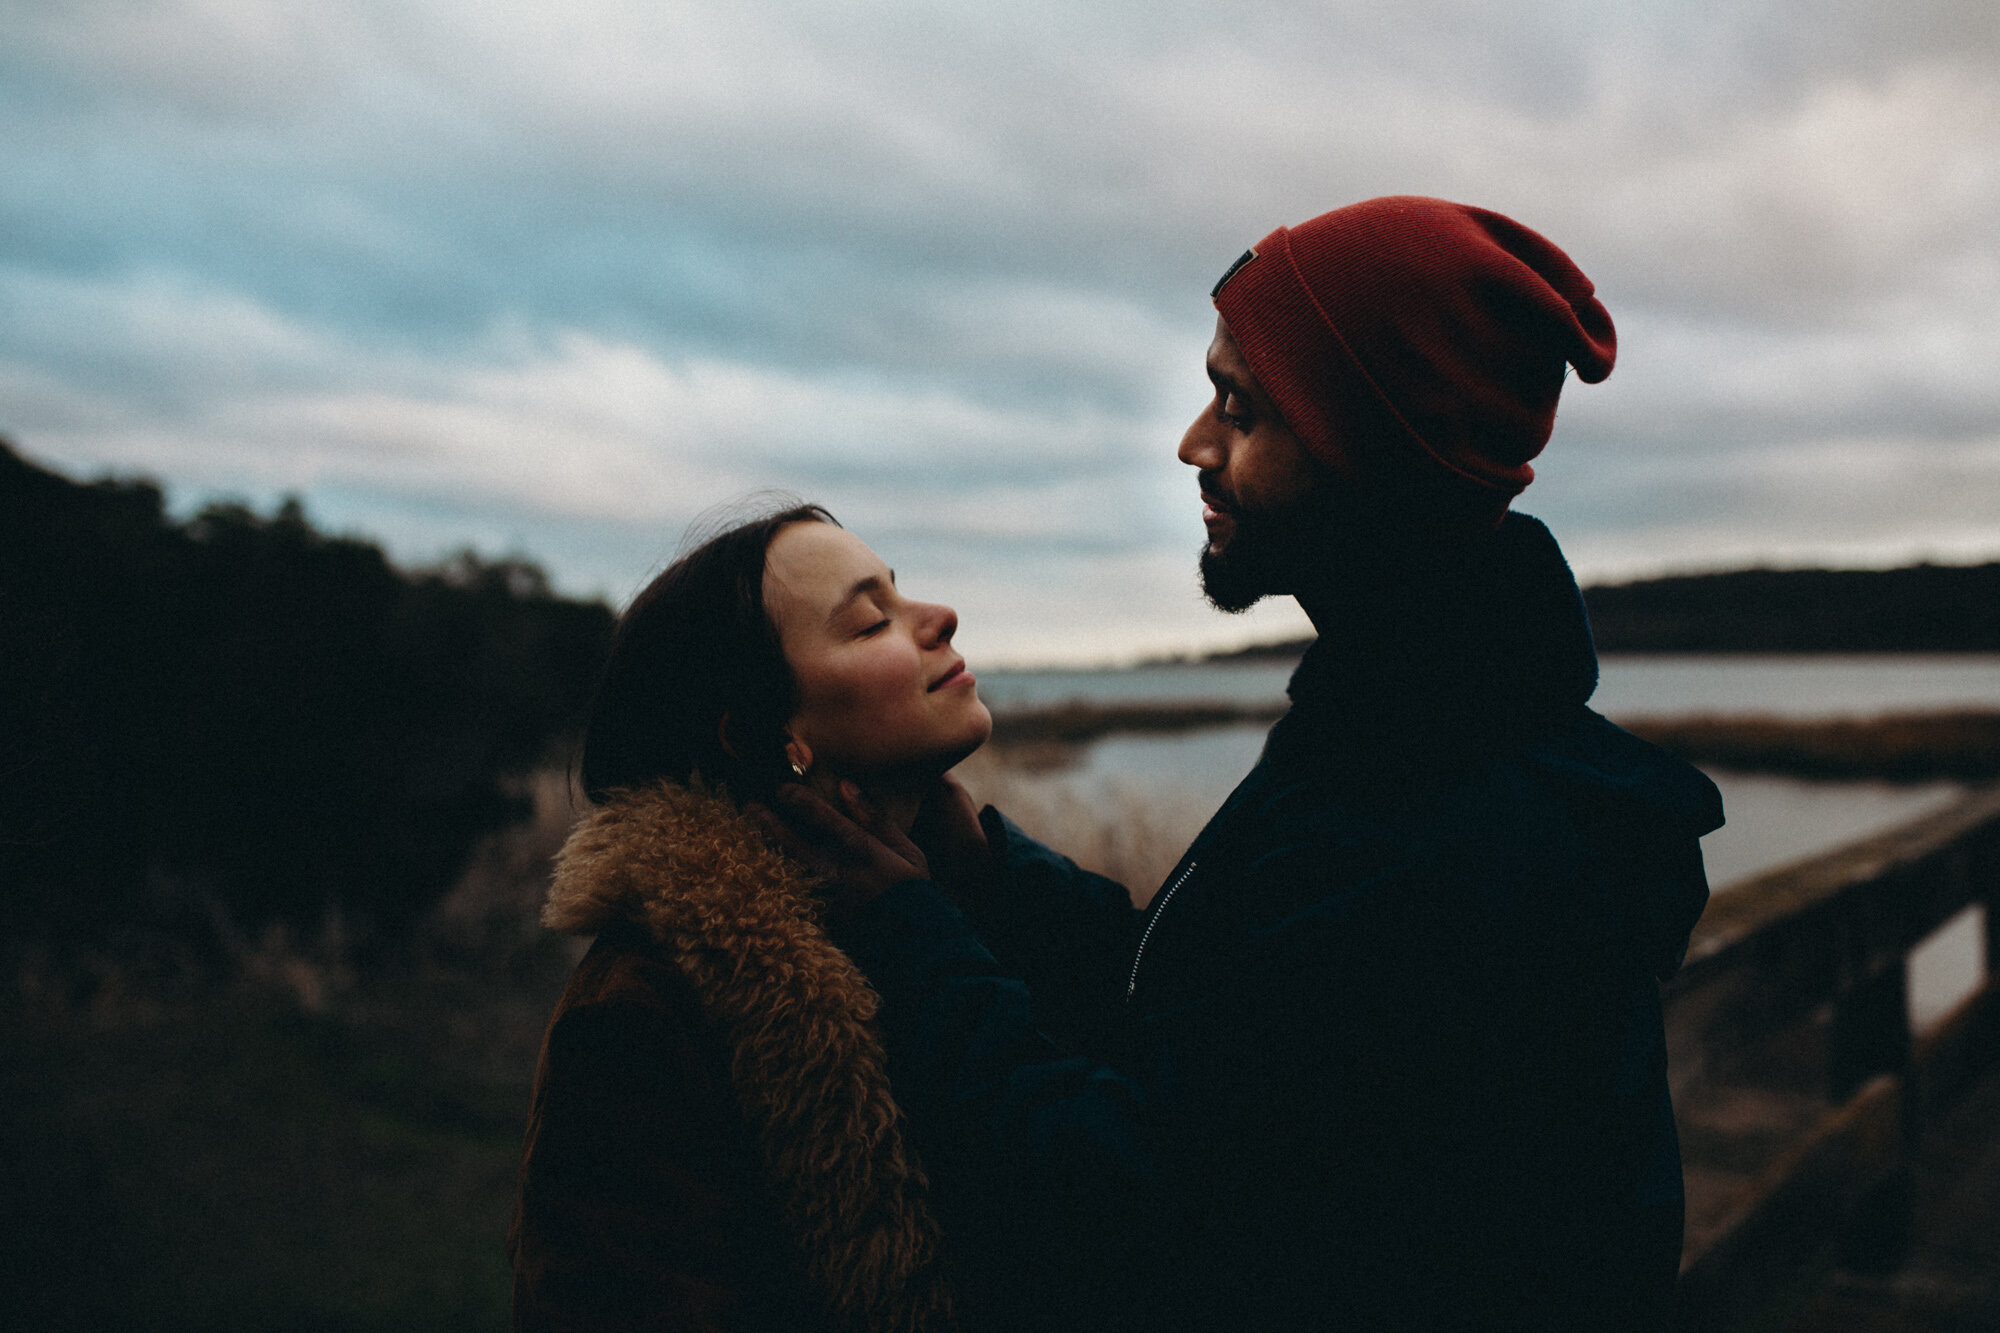 Couple Photography photography Cailin Rose Photography Castlemaine, Melbourne